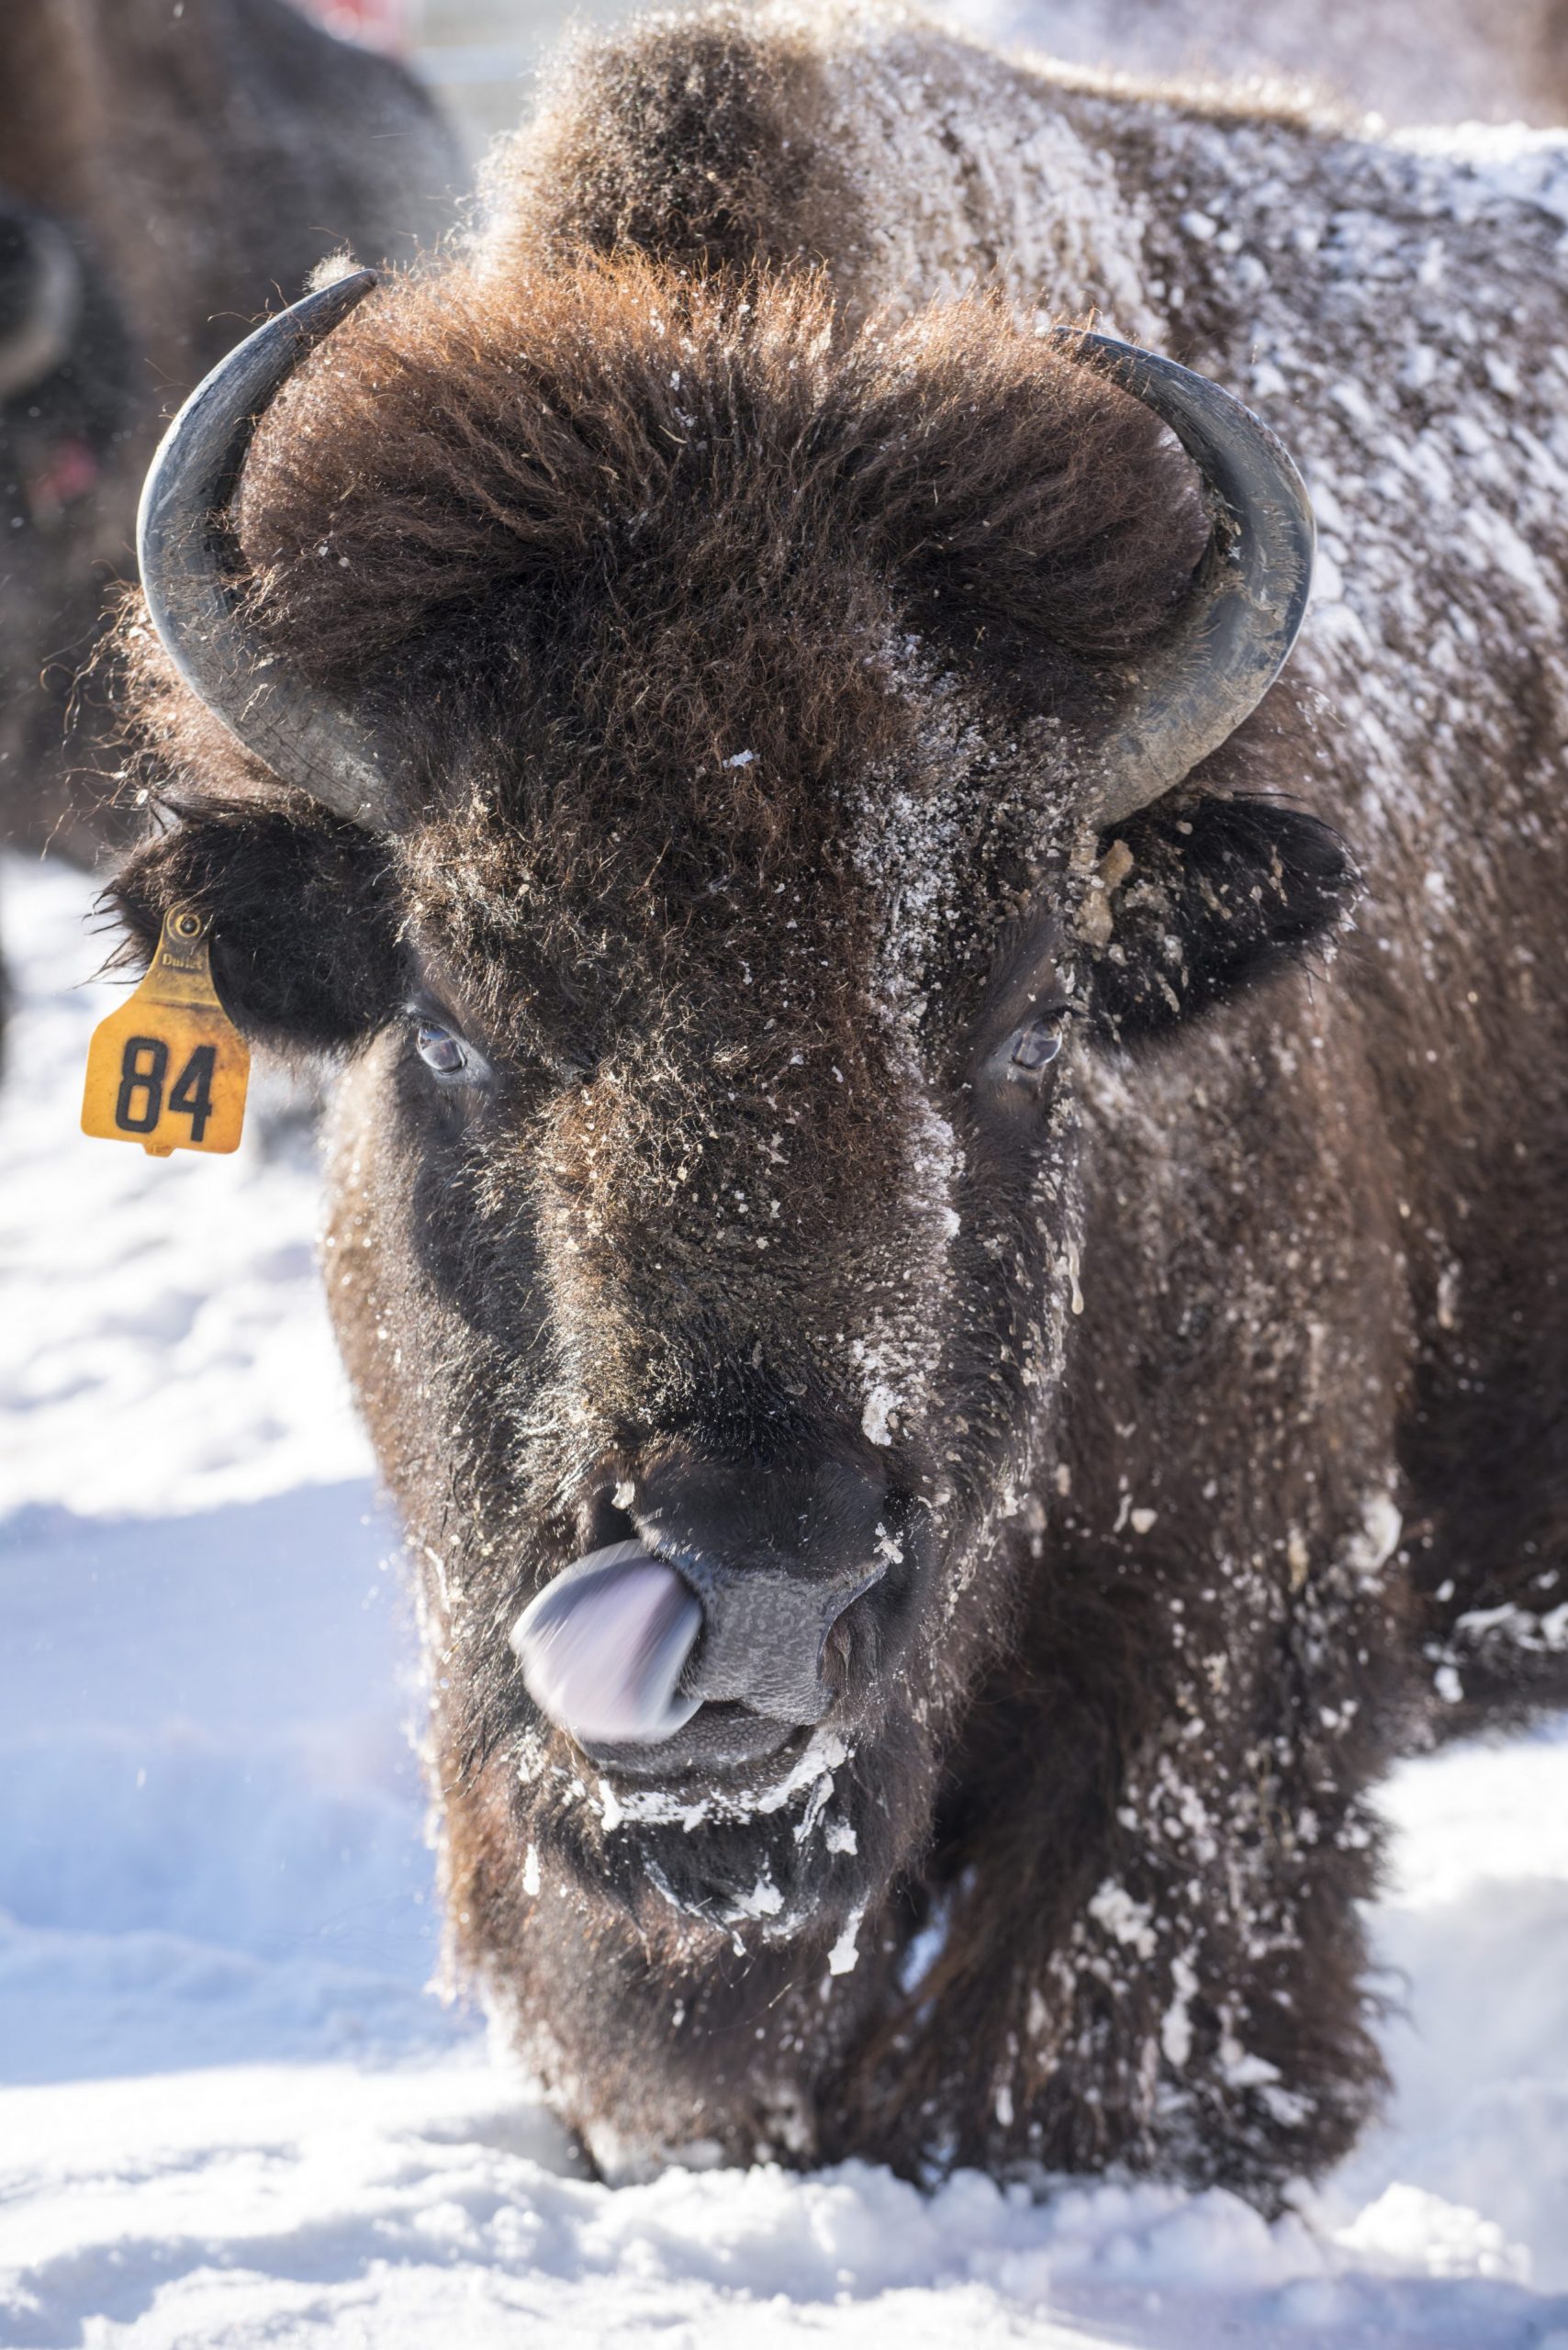 Bison in snow, tongue out